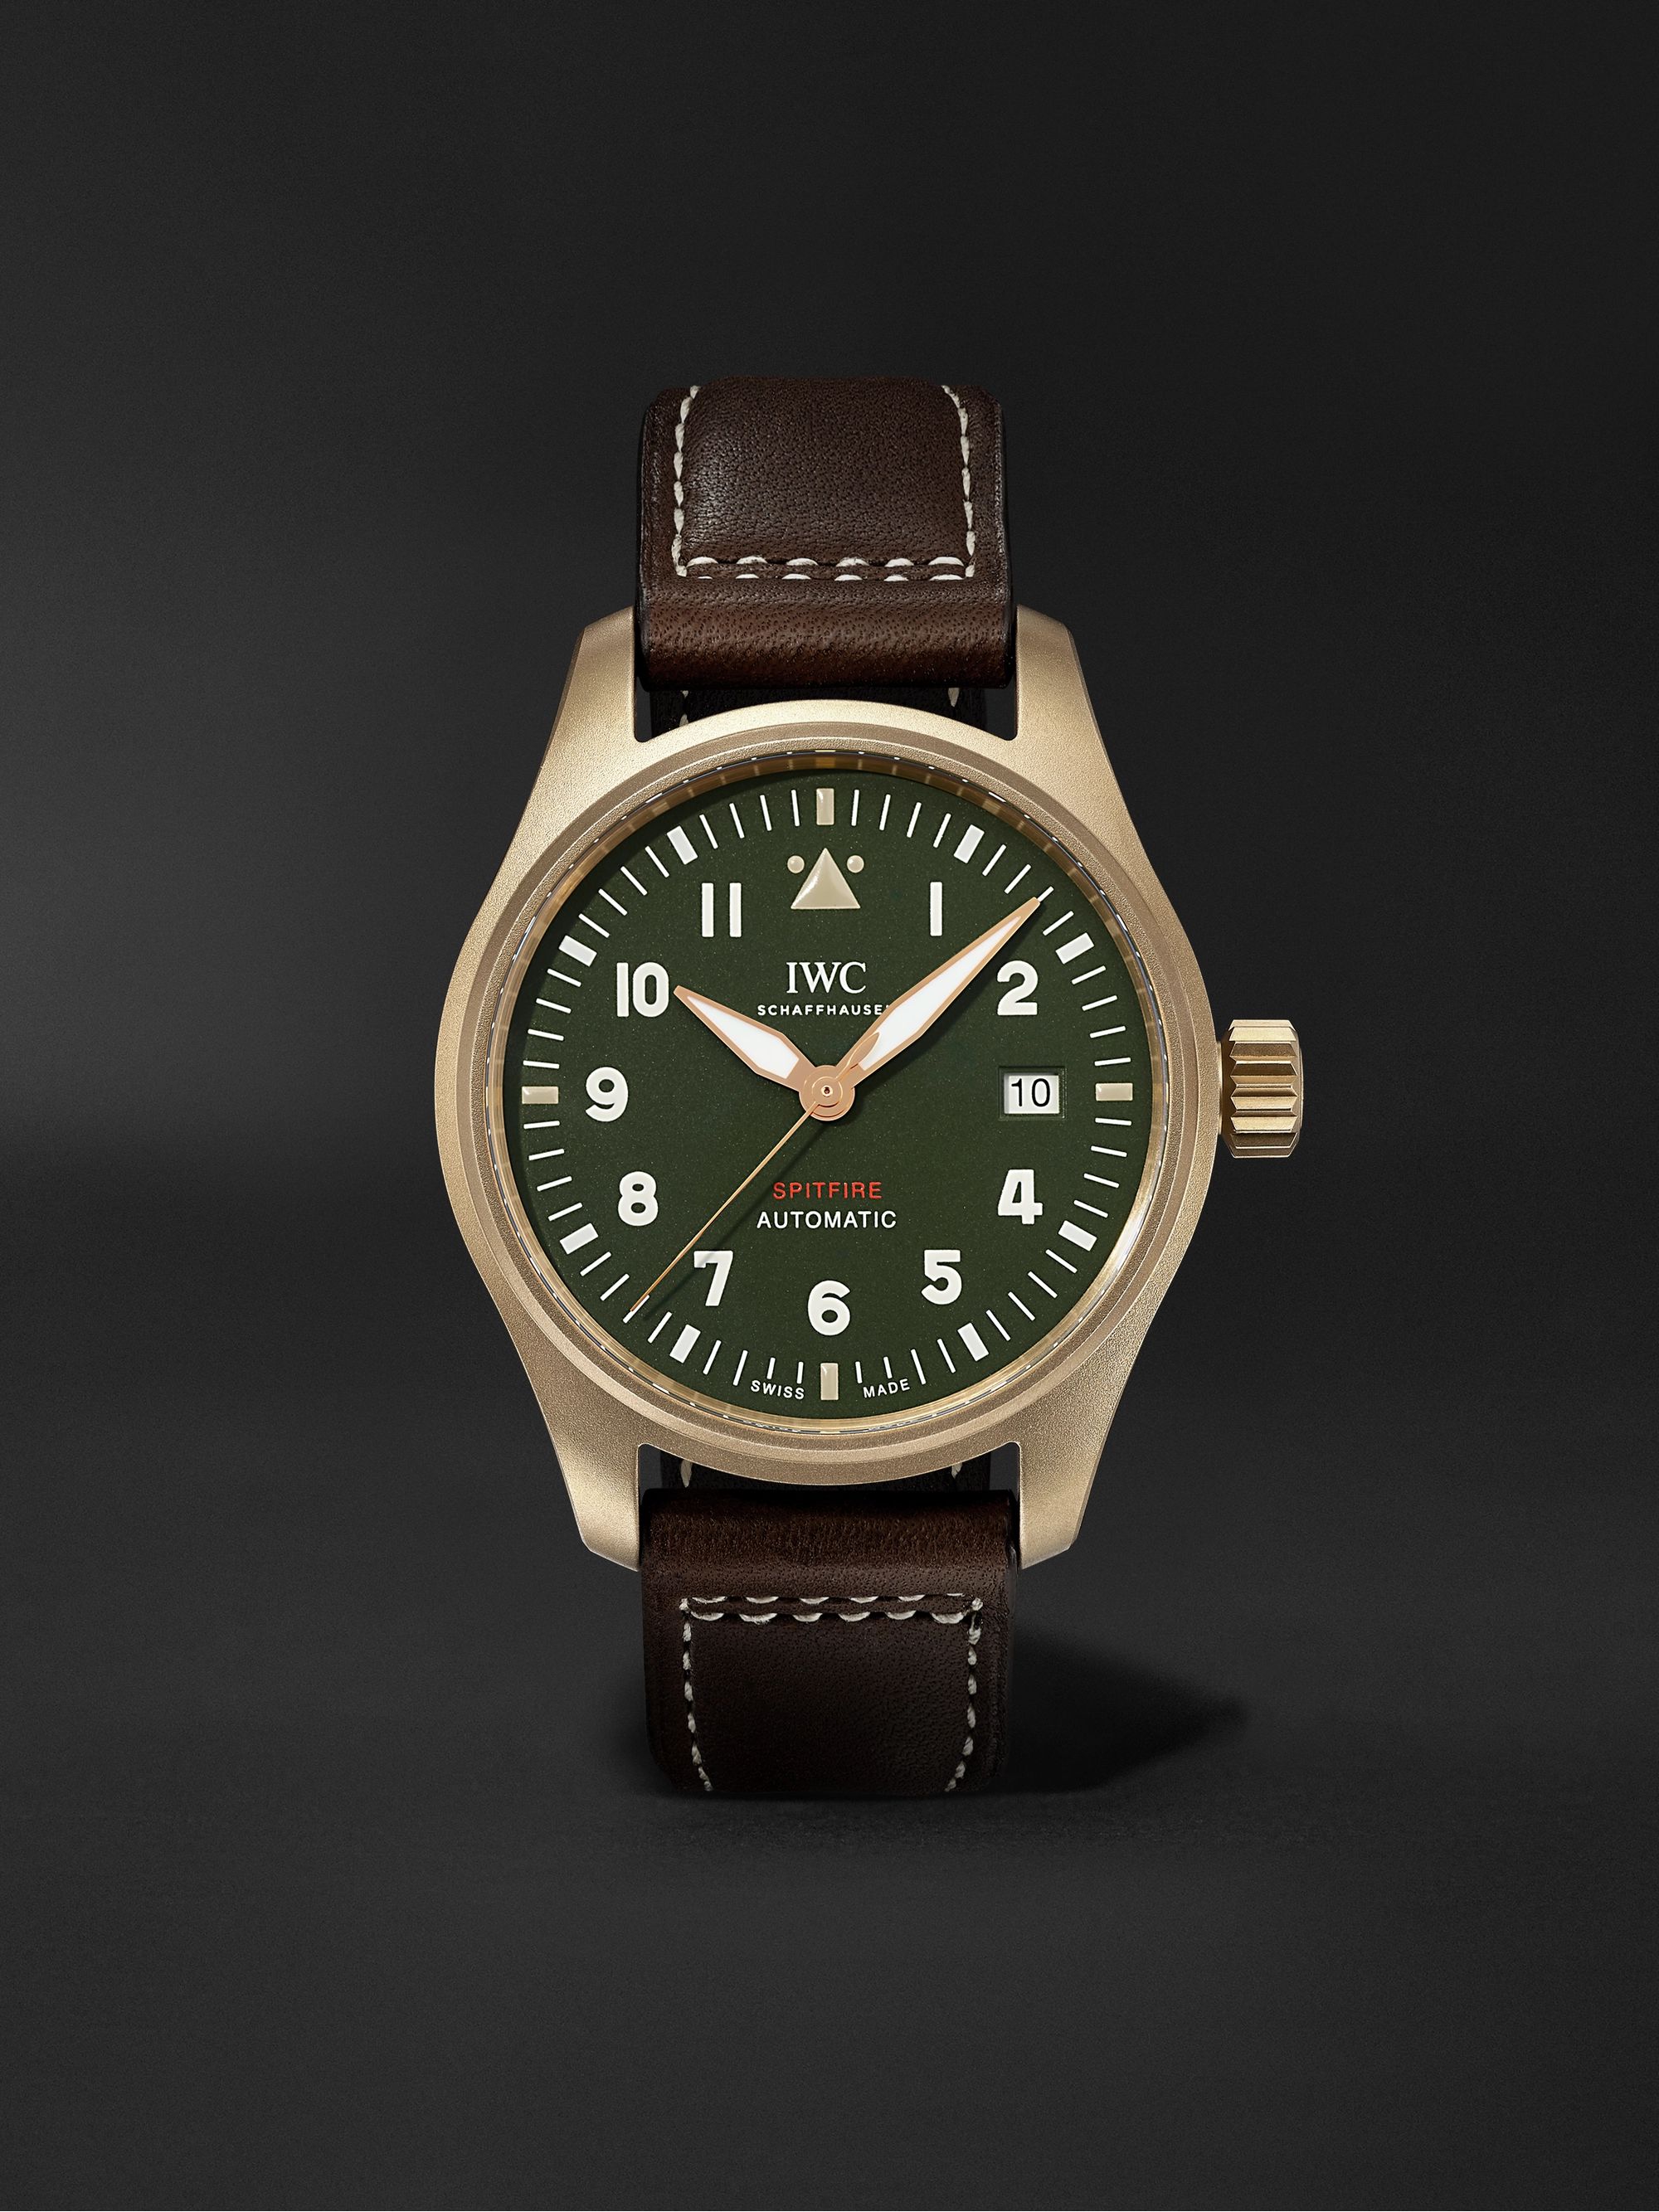 IWC SCHAFFHAUSEN Pilot's Spitfire Automatic 39mm Bronze and Leather Watch, Ref. No. IW326802